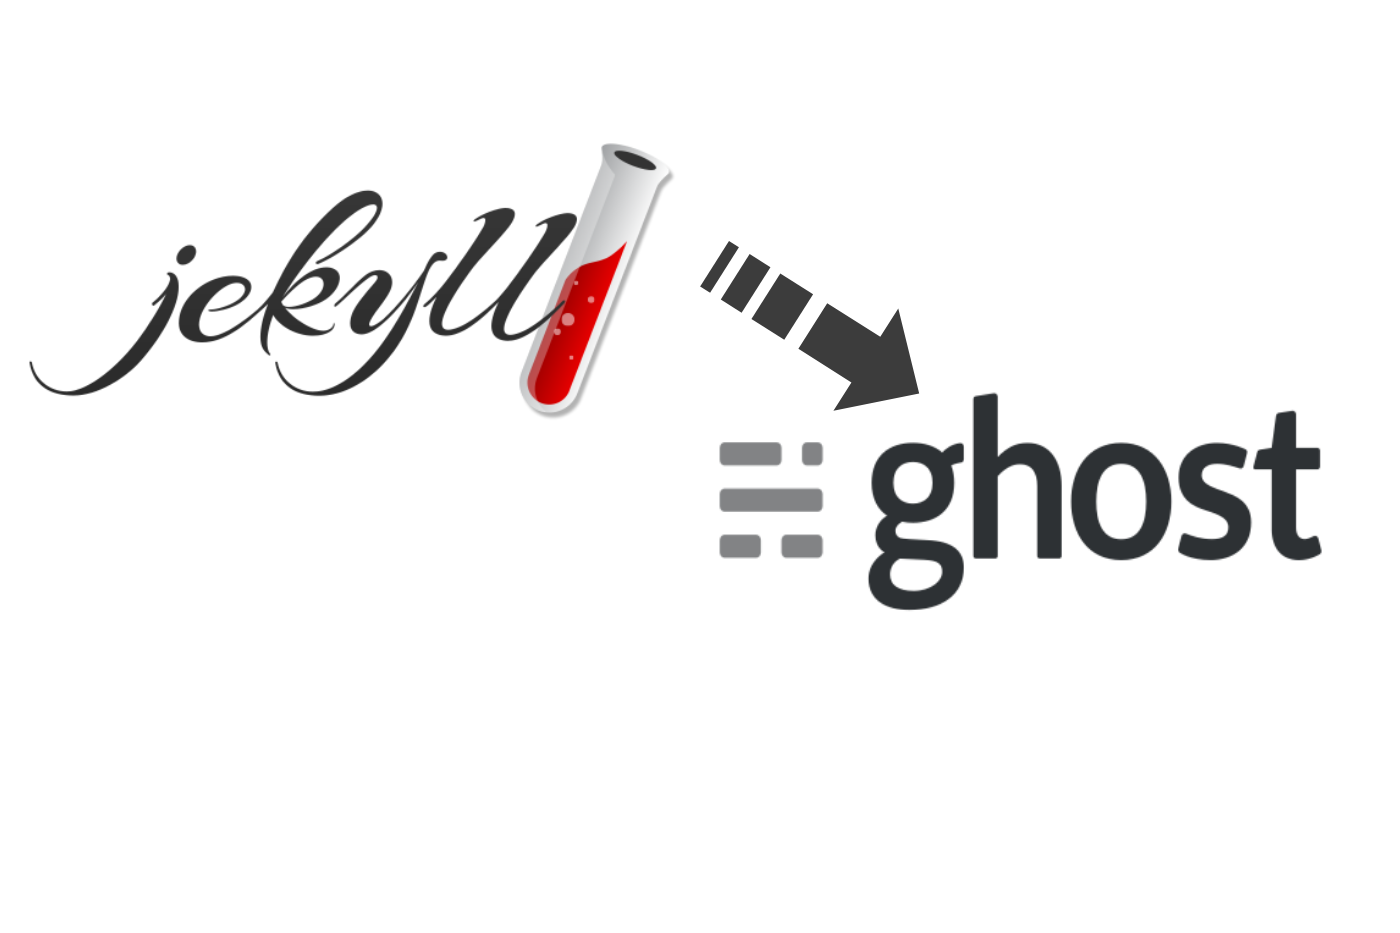 Moving from Jekyll to Ghost